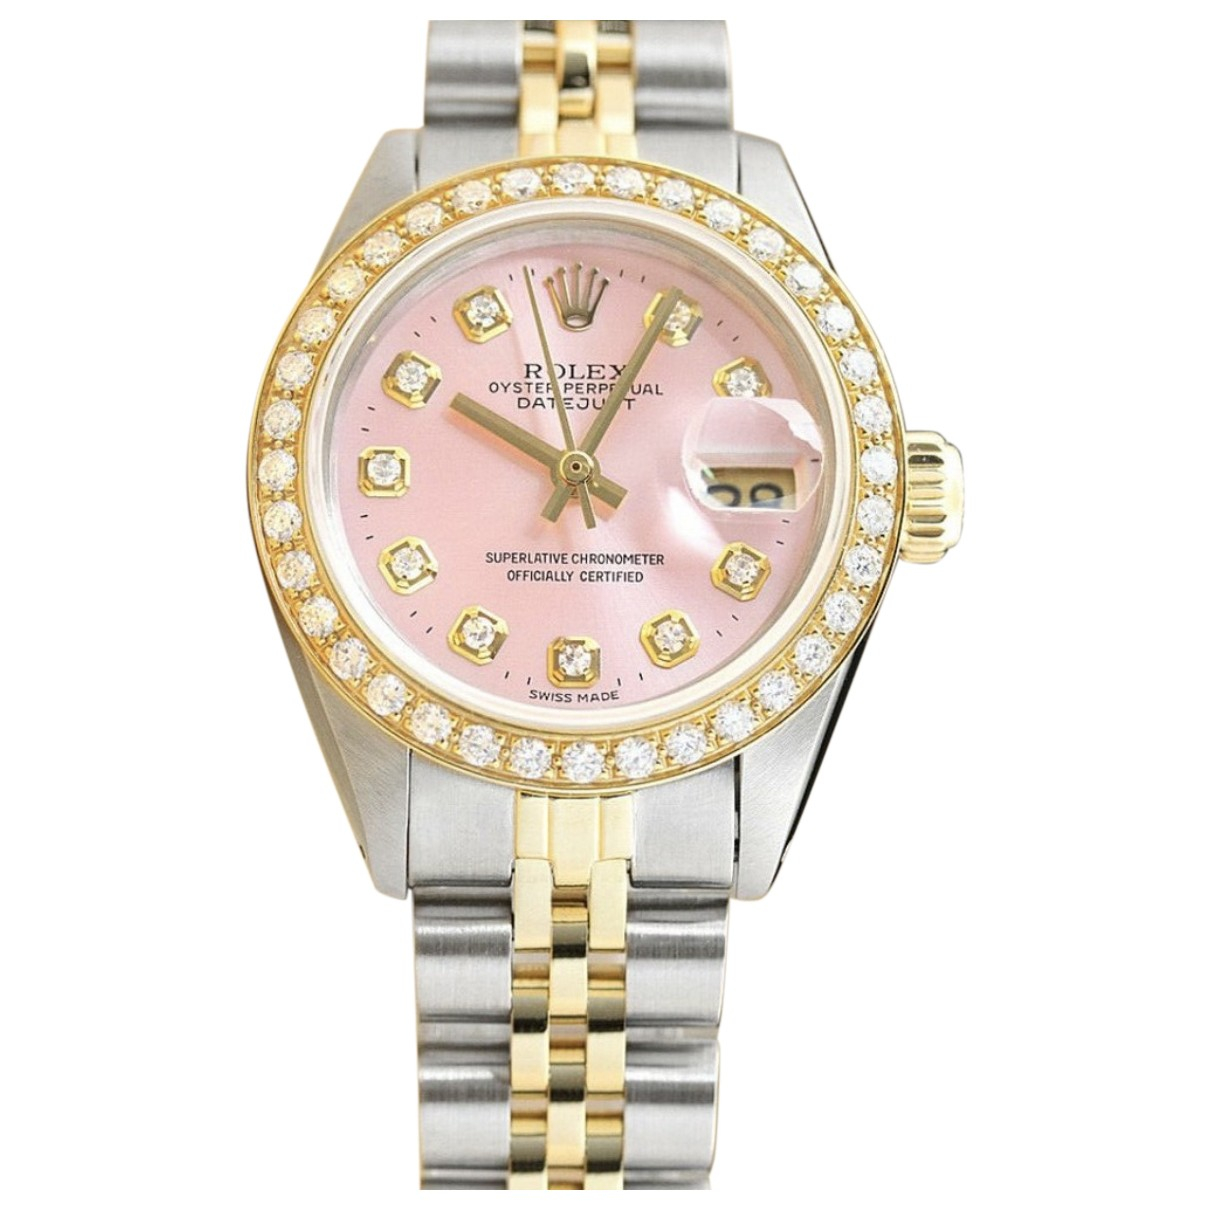 Datejust Free Shipping Special sale item Cheap Bargain Gift watch